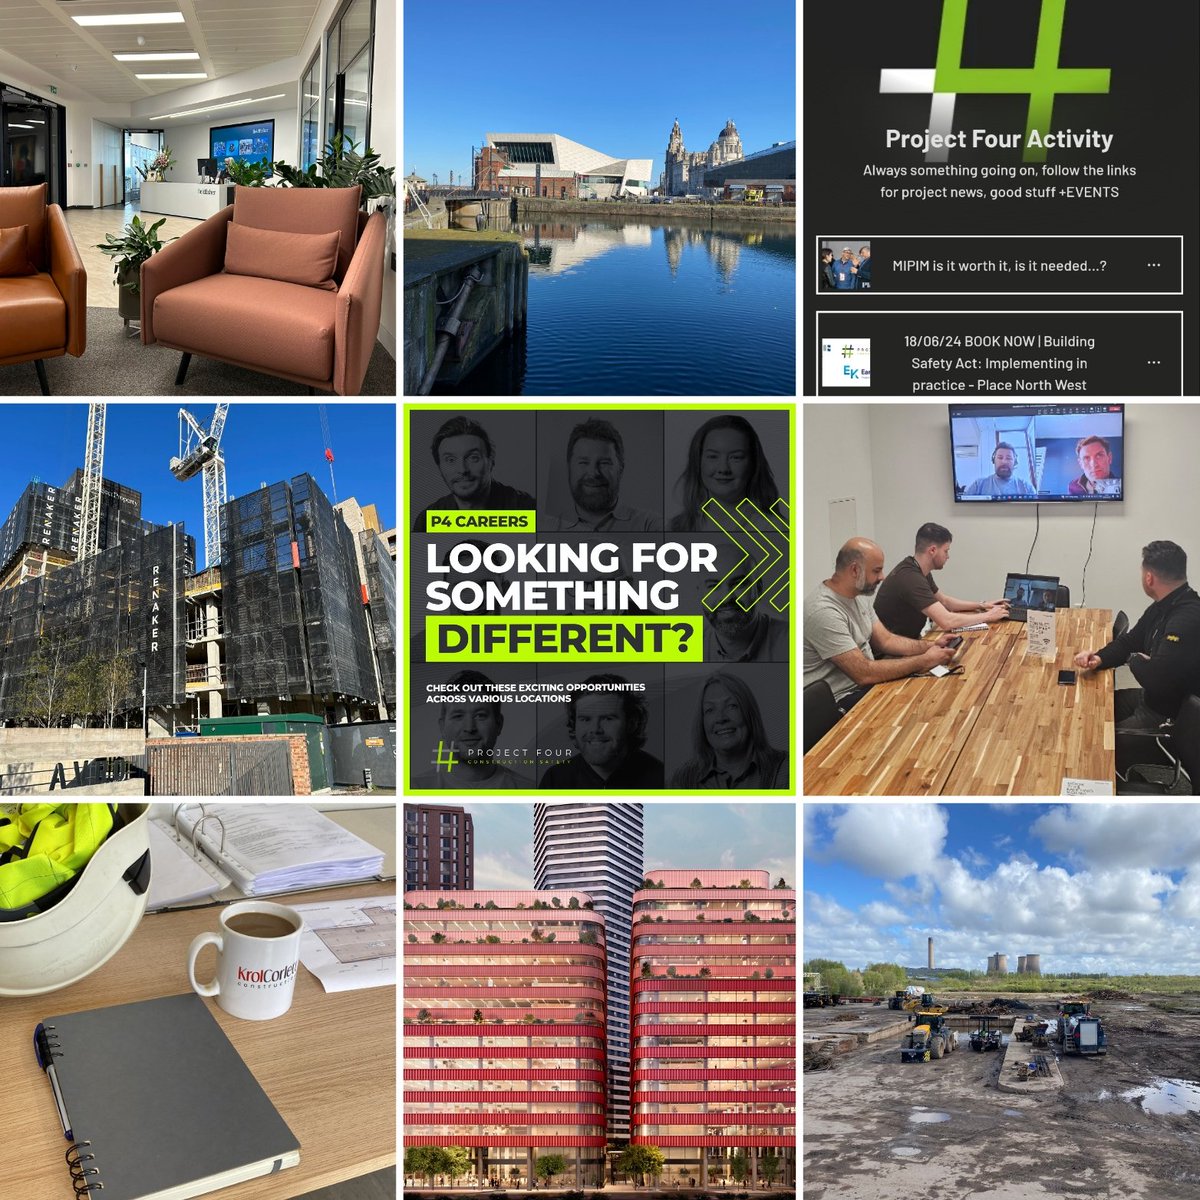 It's been a crazy few months, taking us into May later this week.

New clients + projects, retained contracts, new BR team members, four more joining before the end of June, MIPIM in Cannes, UKREIIF in Leeds pending, BSA Conference in June, a new financial director, new offices..